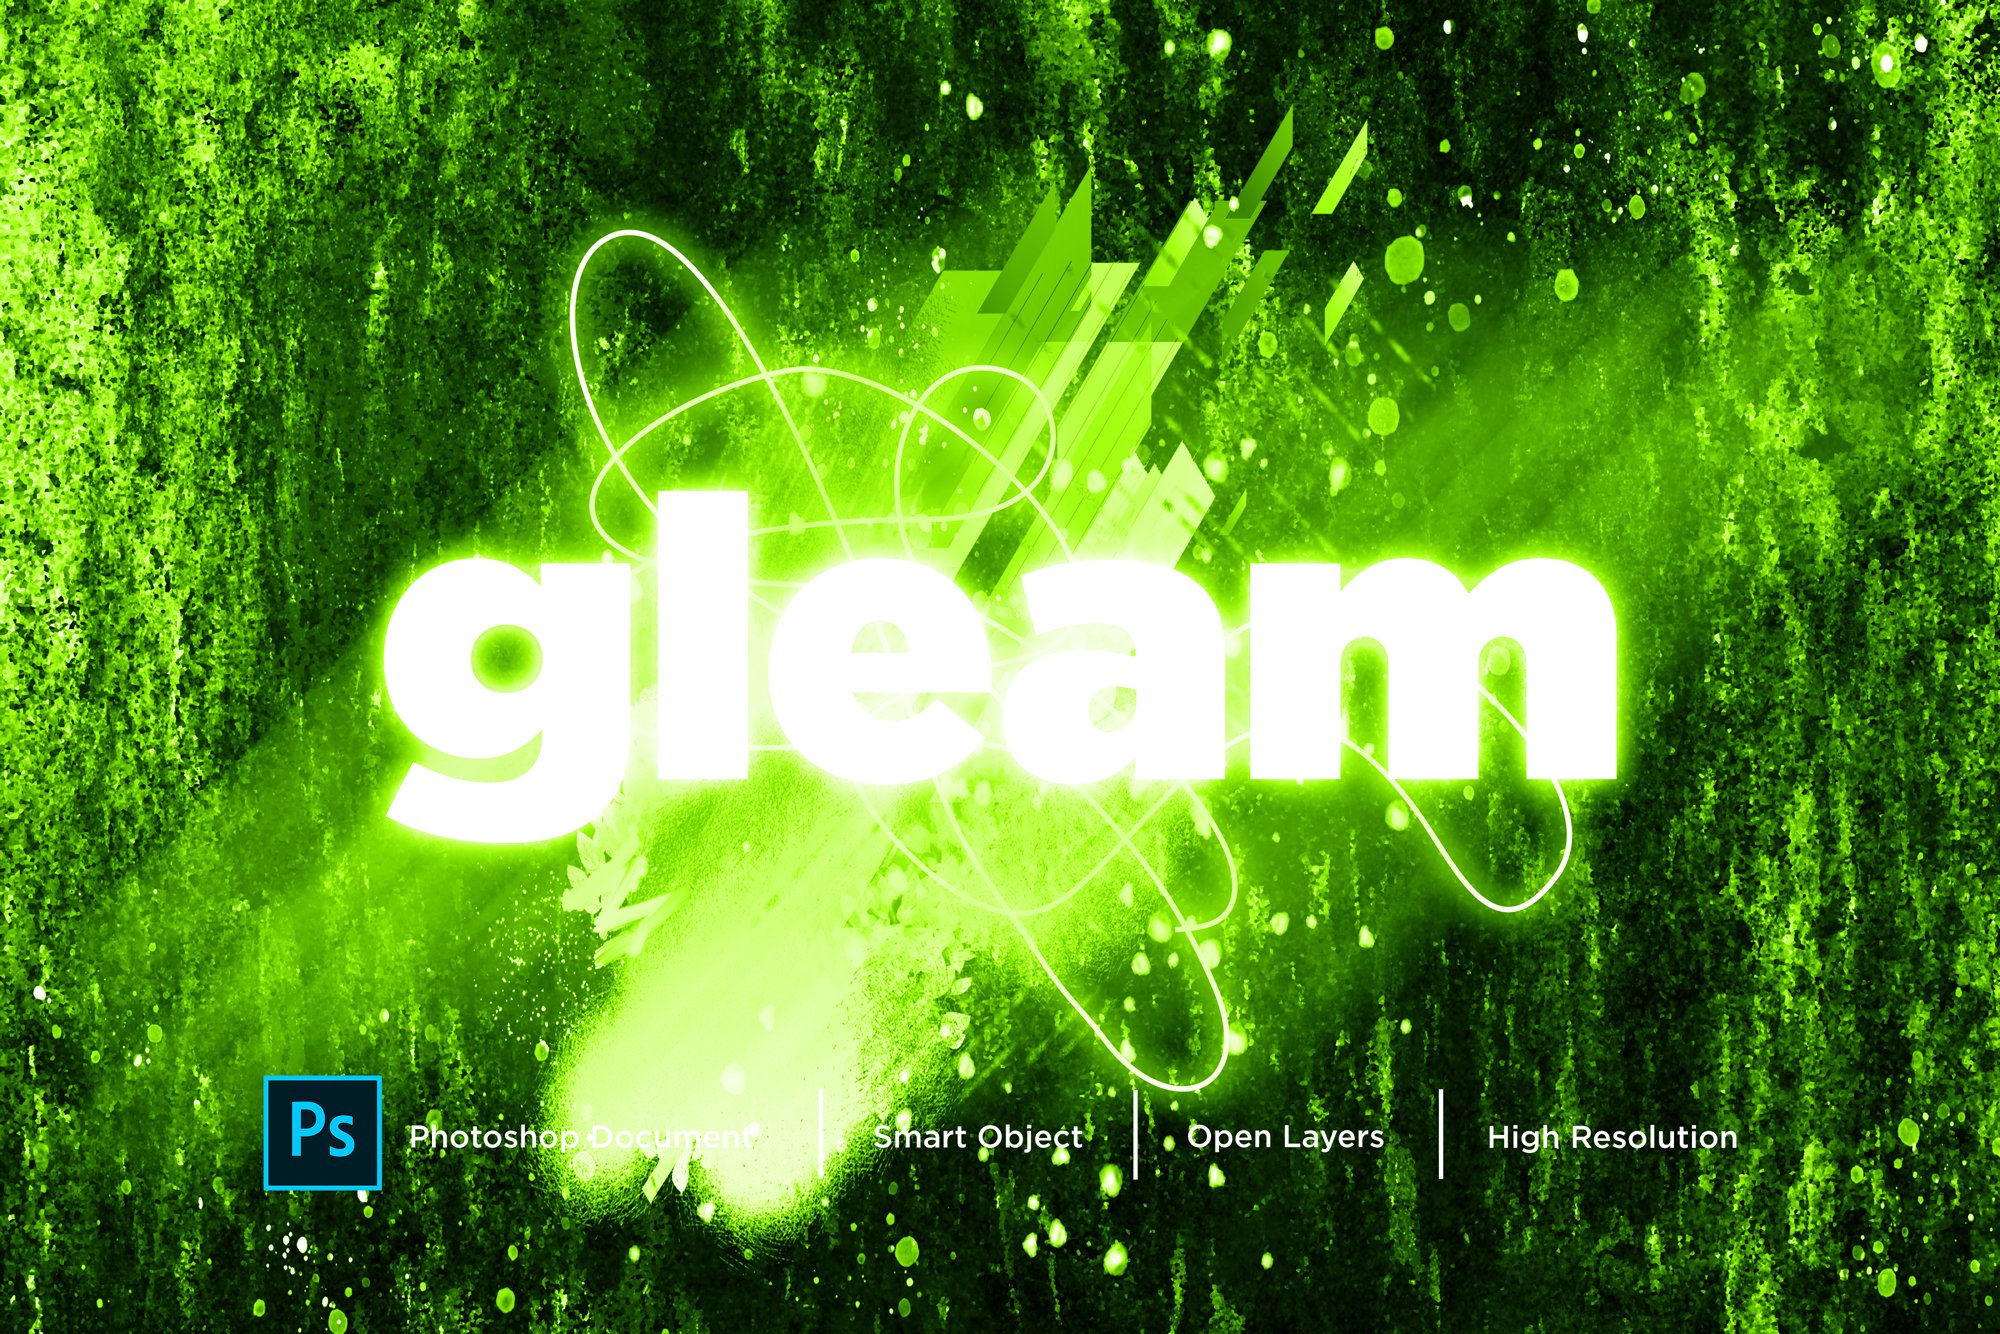 Gleam Text Effect & Layer Stylecover image.